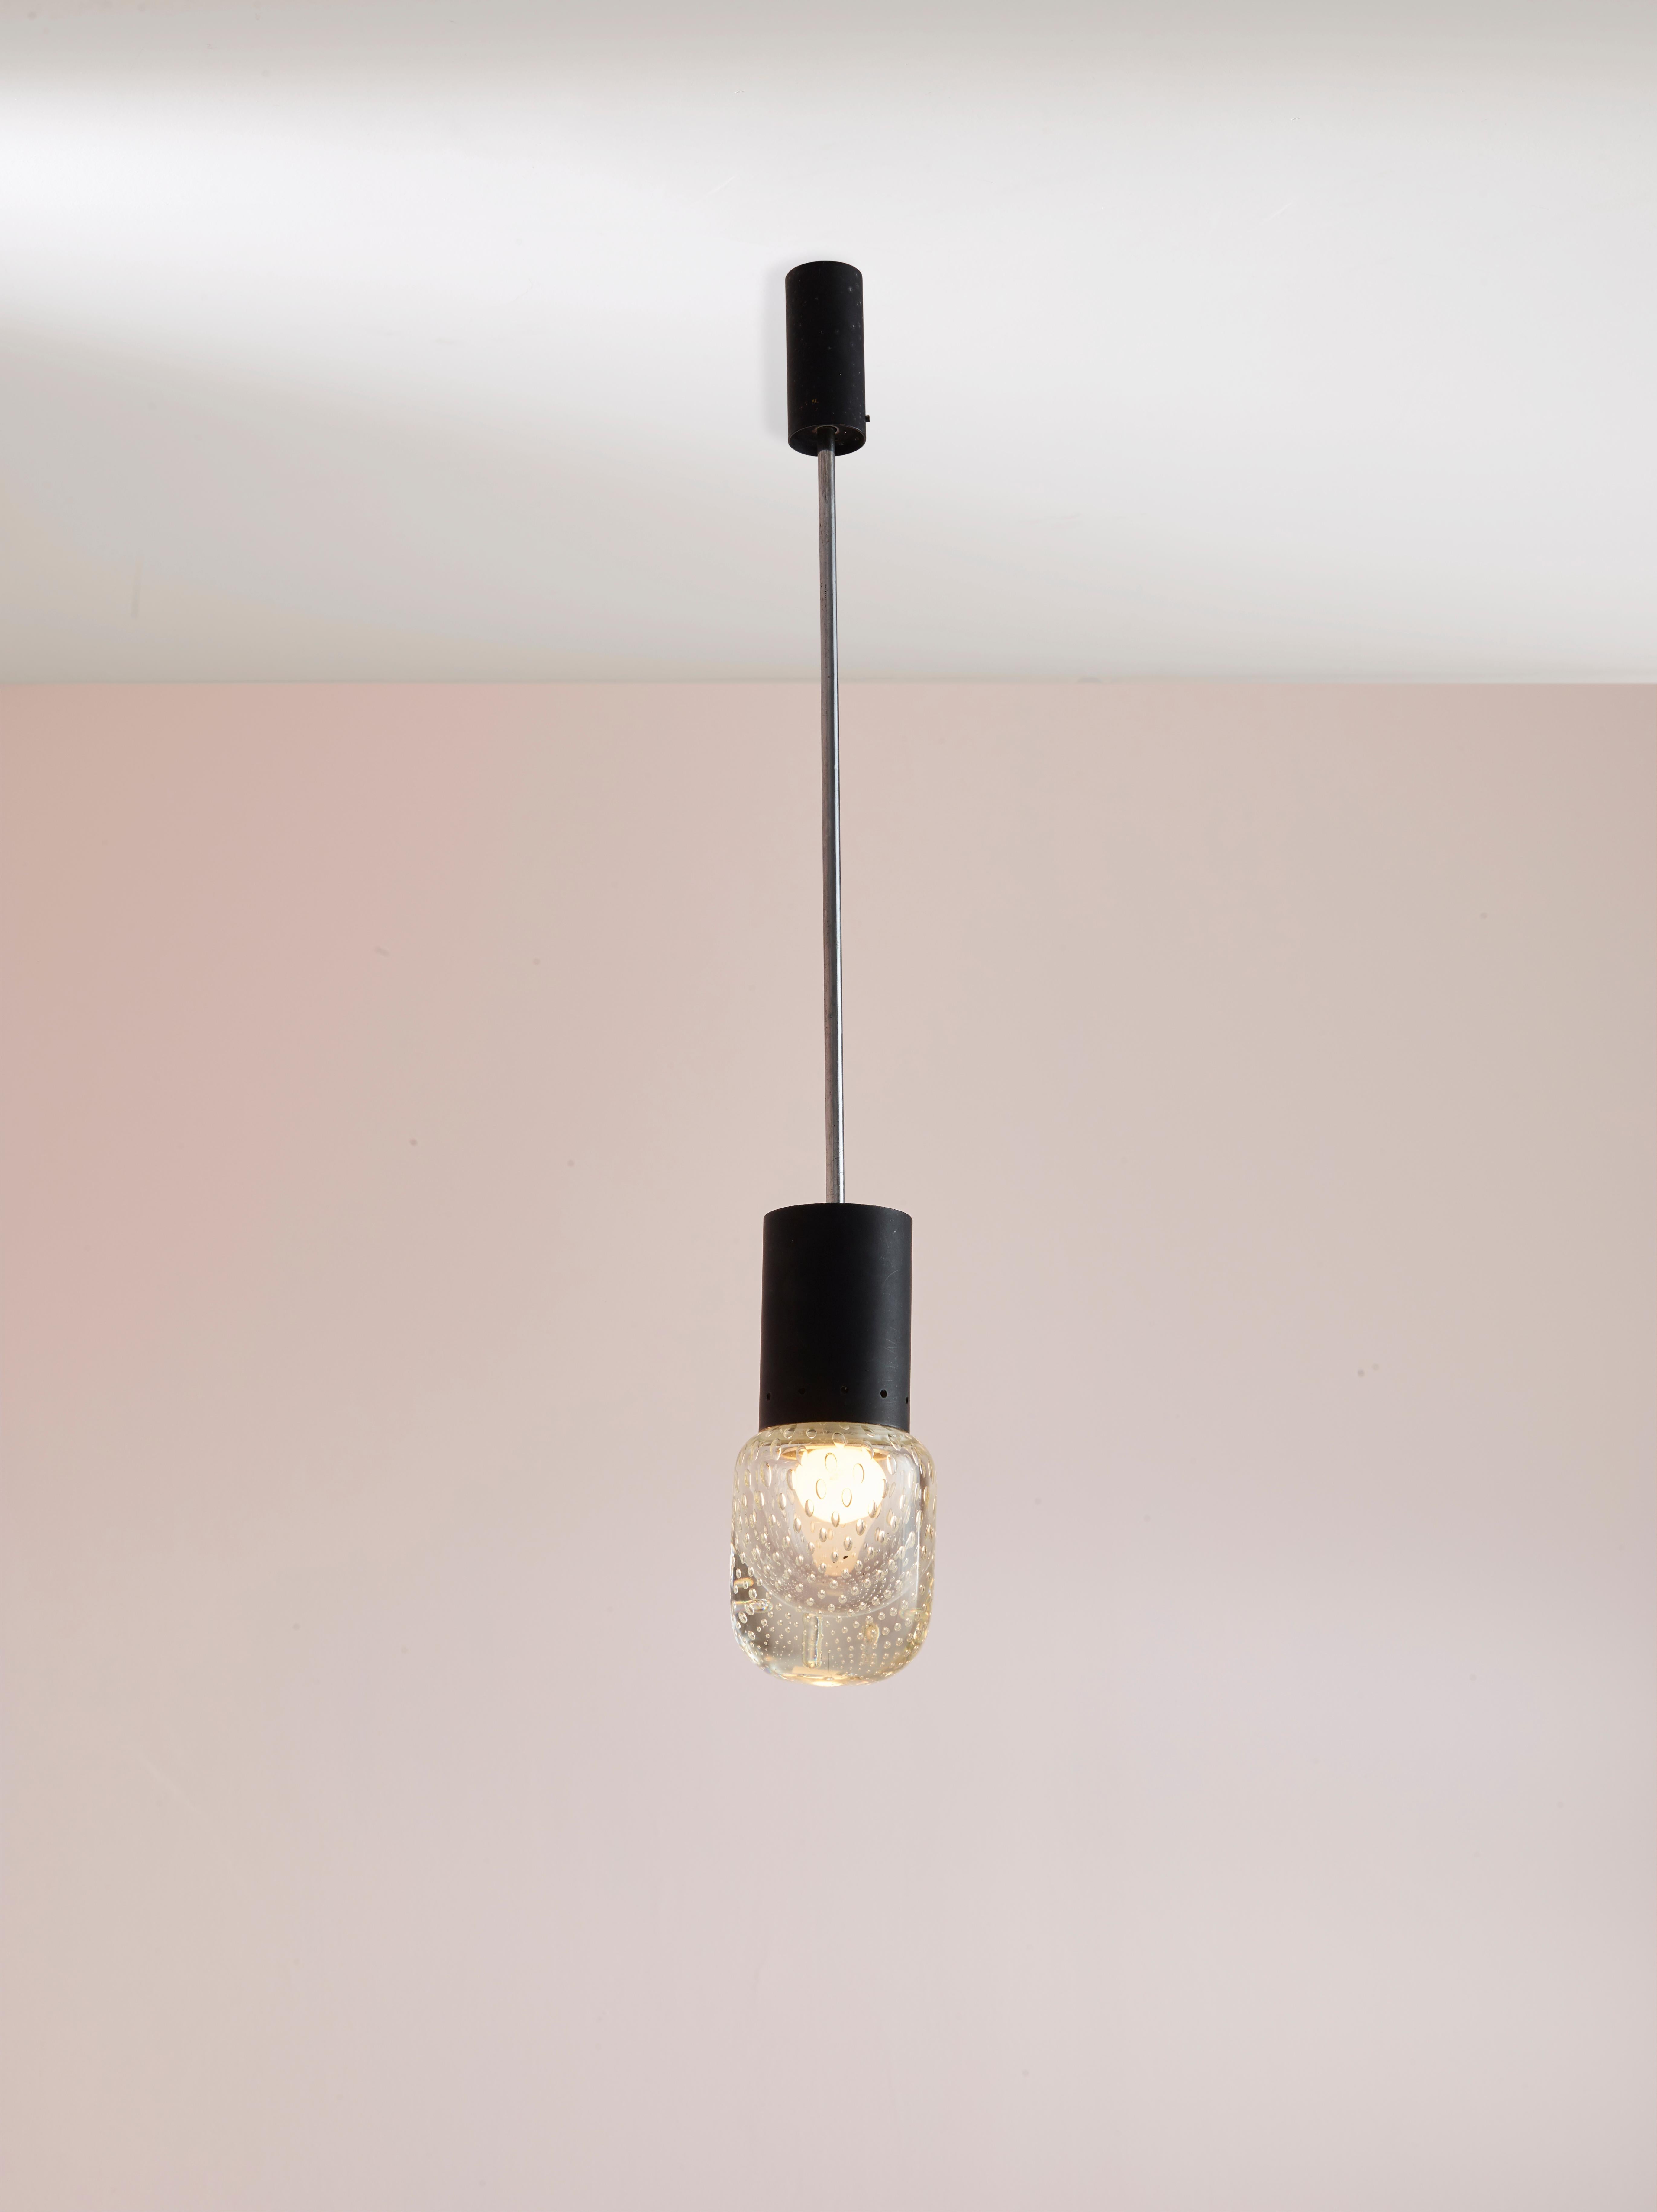 The pendant light is a beautiful example of mid-century modern design, produced in the 1960s by the renowned Italian glassmaking company Seguso Vetri D'arte and designed by the celebrated lighting designer Gino Sarfatti. 

This light is made of